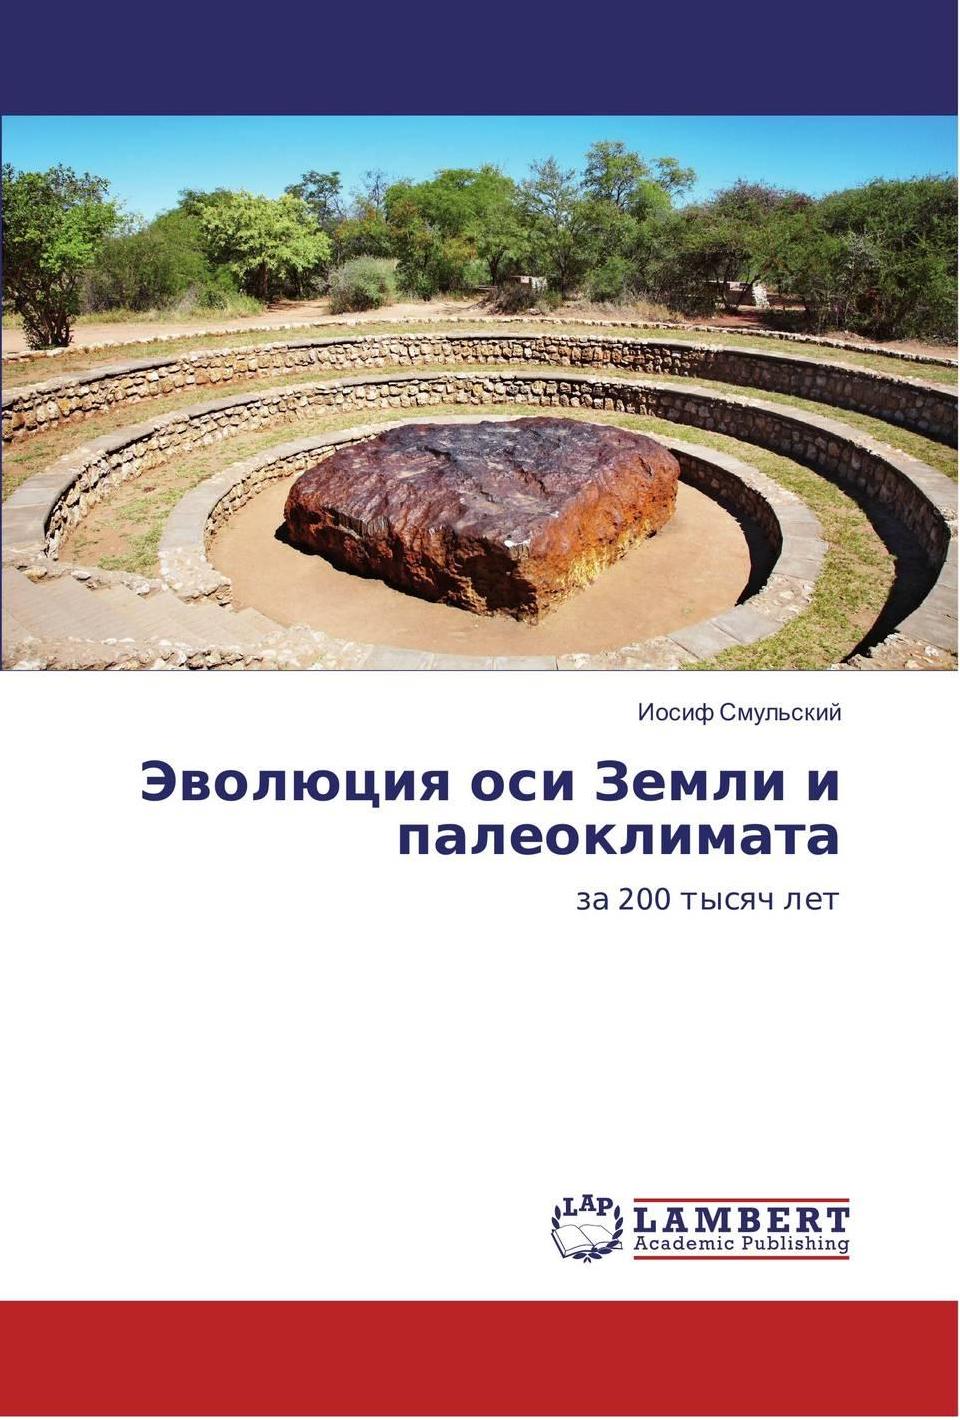 Smulsky J.J. Evolution of the Earth's axis and paleoclimate for 200 thousand years. Saarbrucken, Germany: “LAP Lambert Academic Publishing”, 2016. 228 p. ISBN 978-3-659-95633-1. (In Russian).